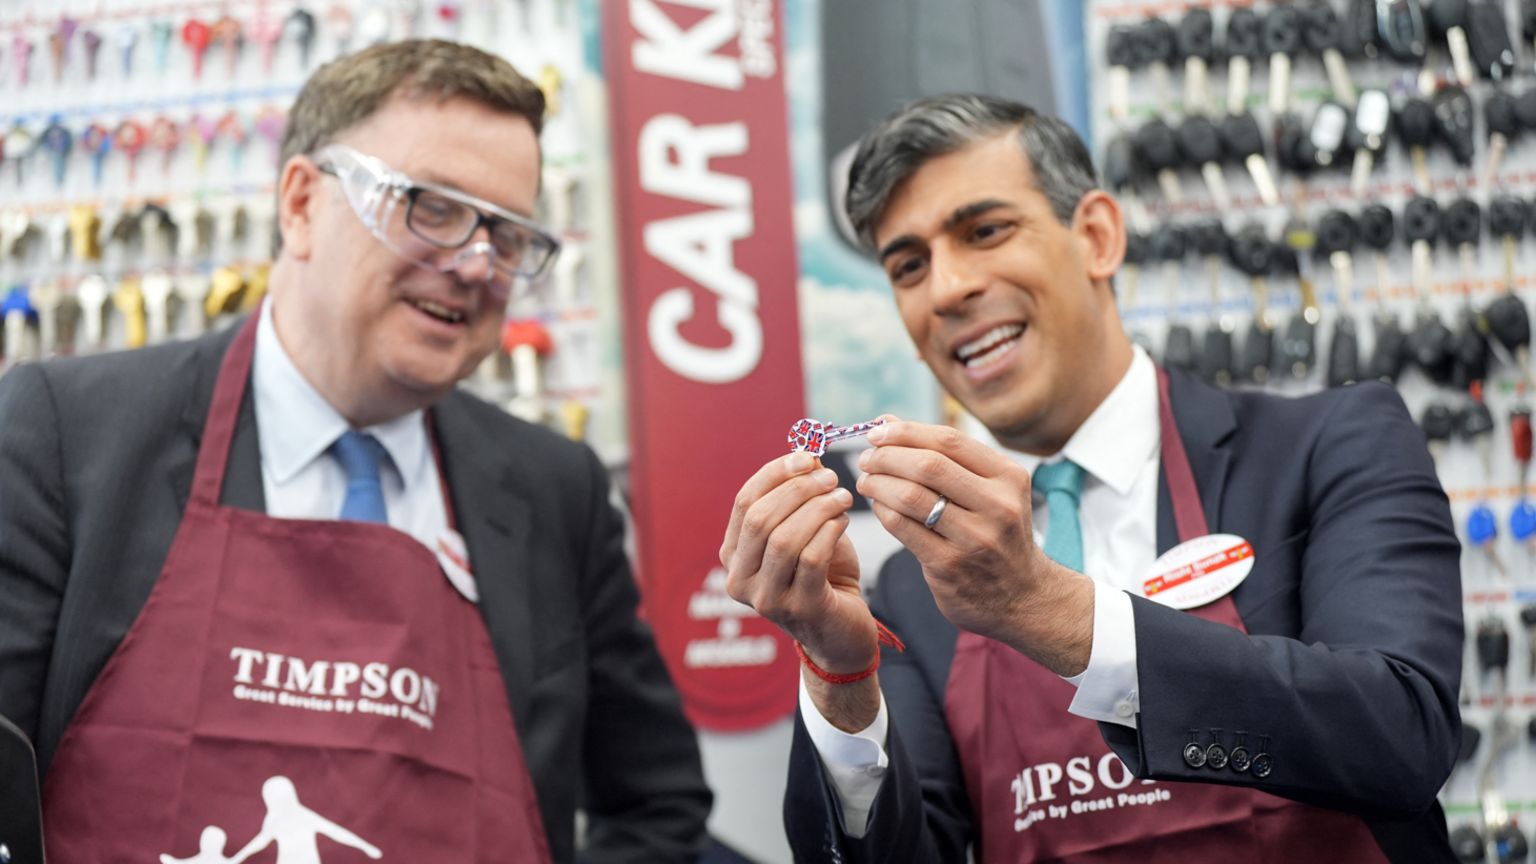 Rishi Sunak and Mel Stride look at a key during a visit to Timpsons